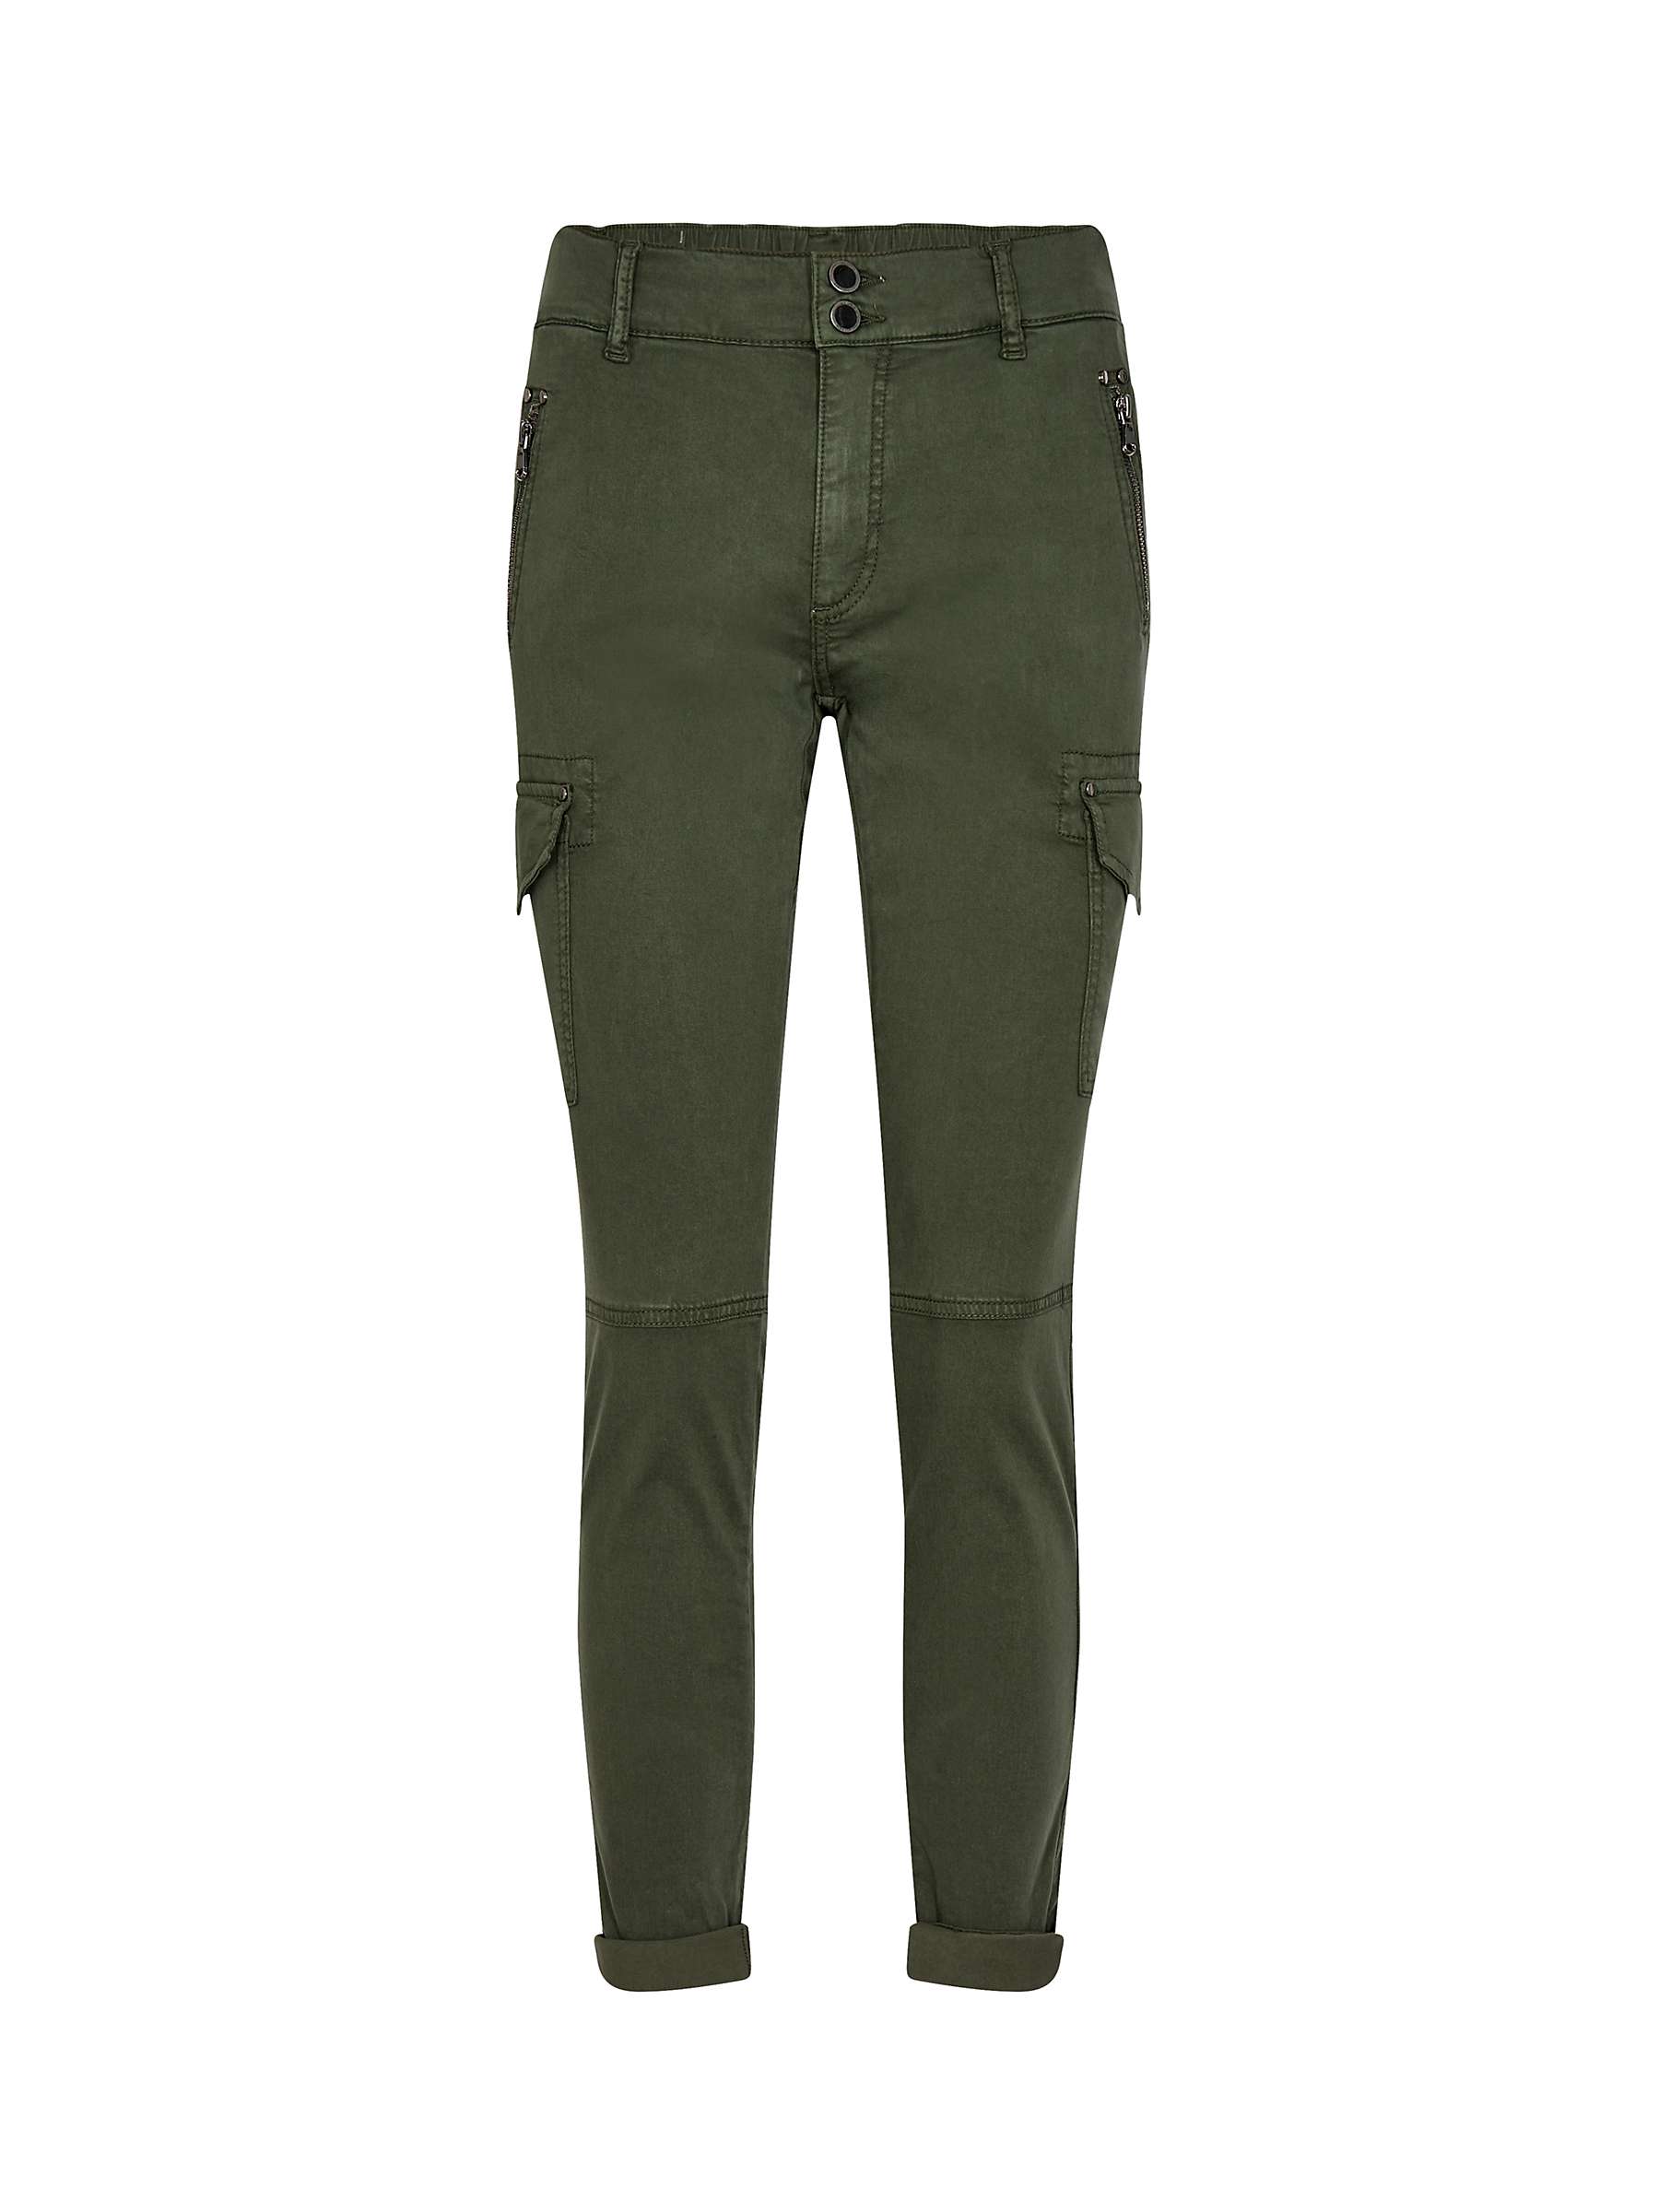 Buy MOS MOSH Gilles Cotton Blend Trousers, Forest Night Online at johnlewis.com